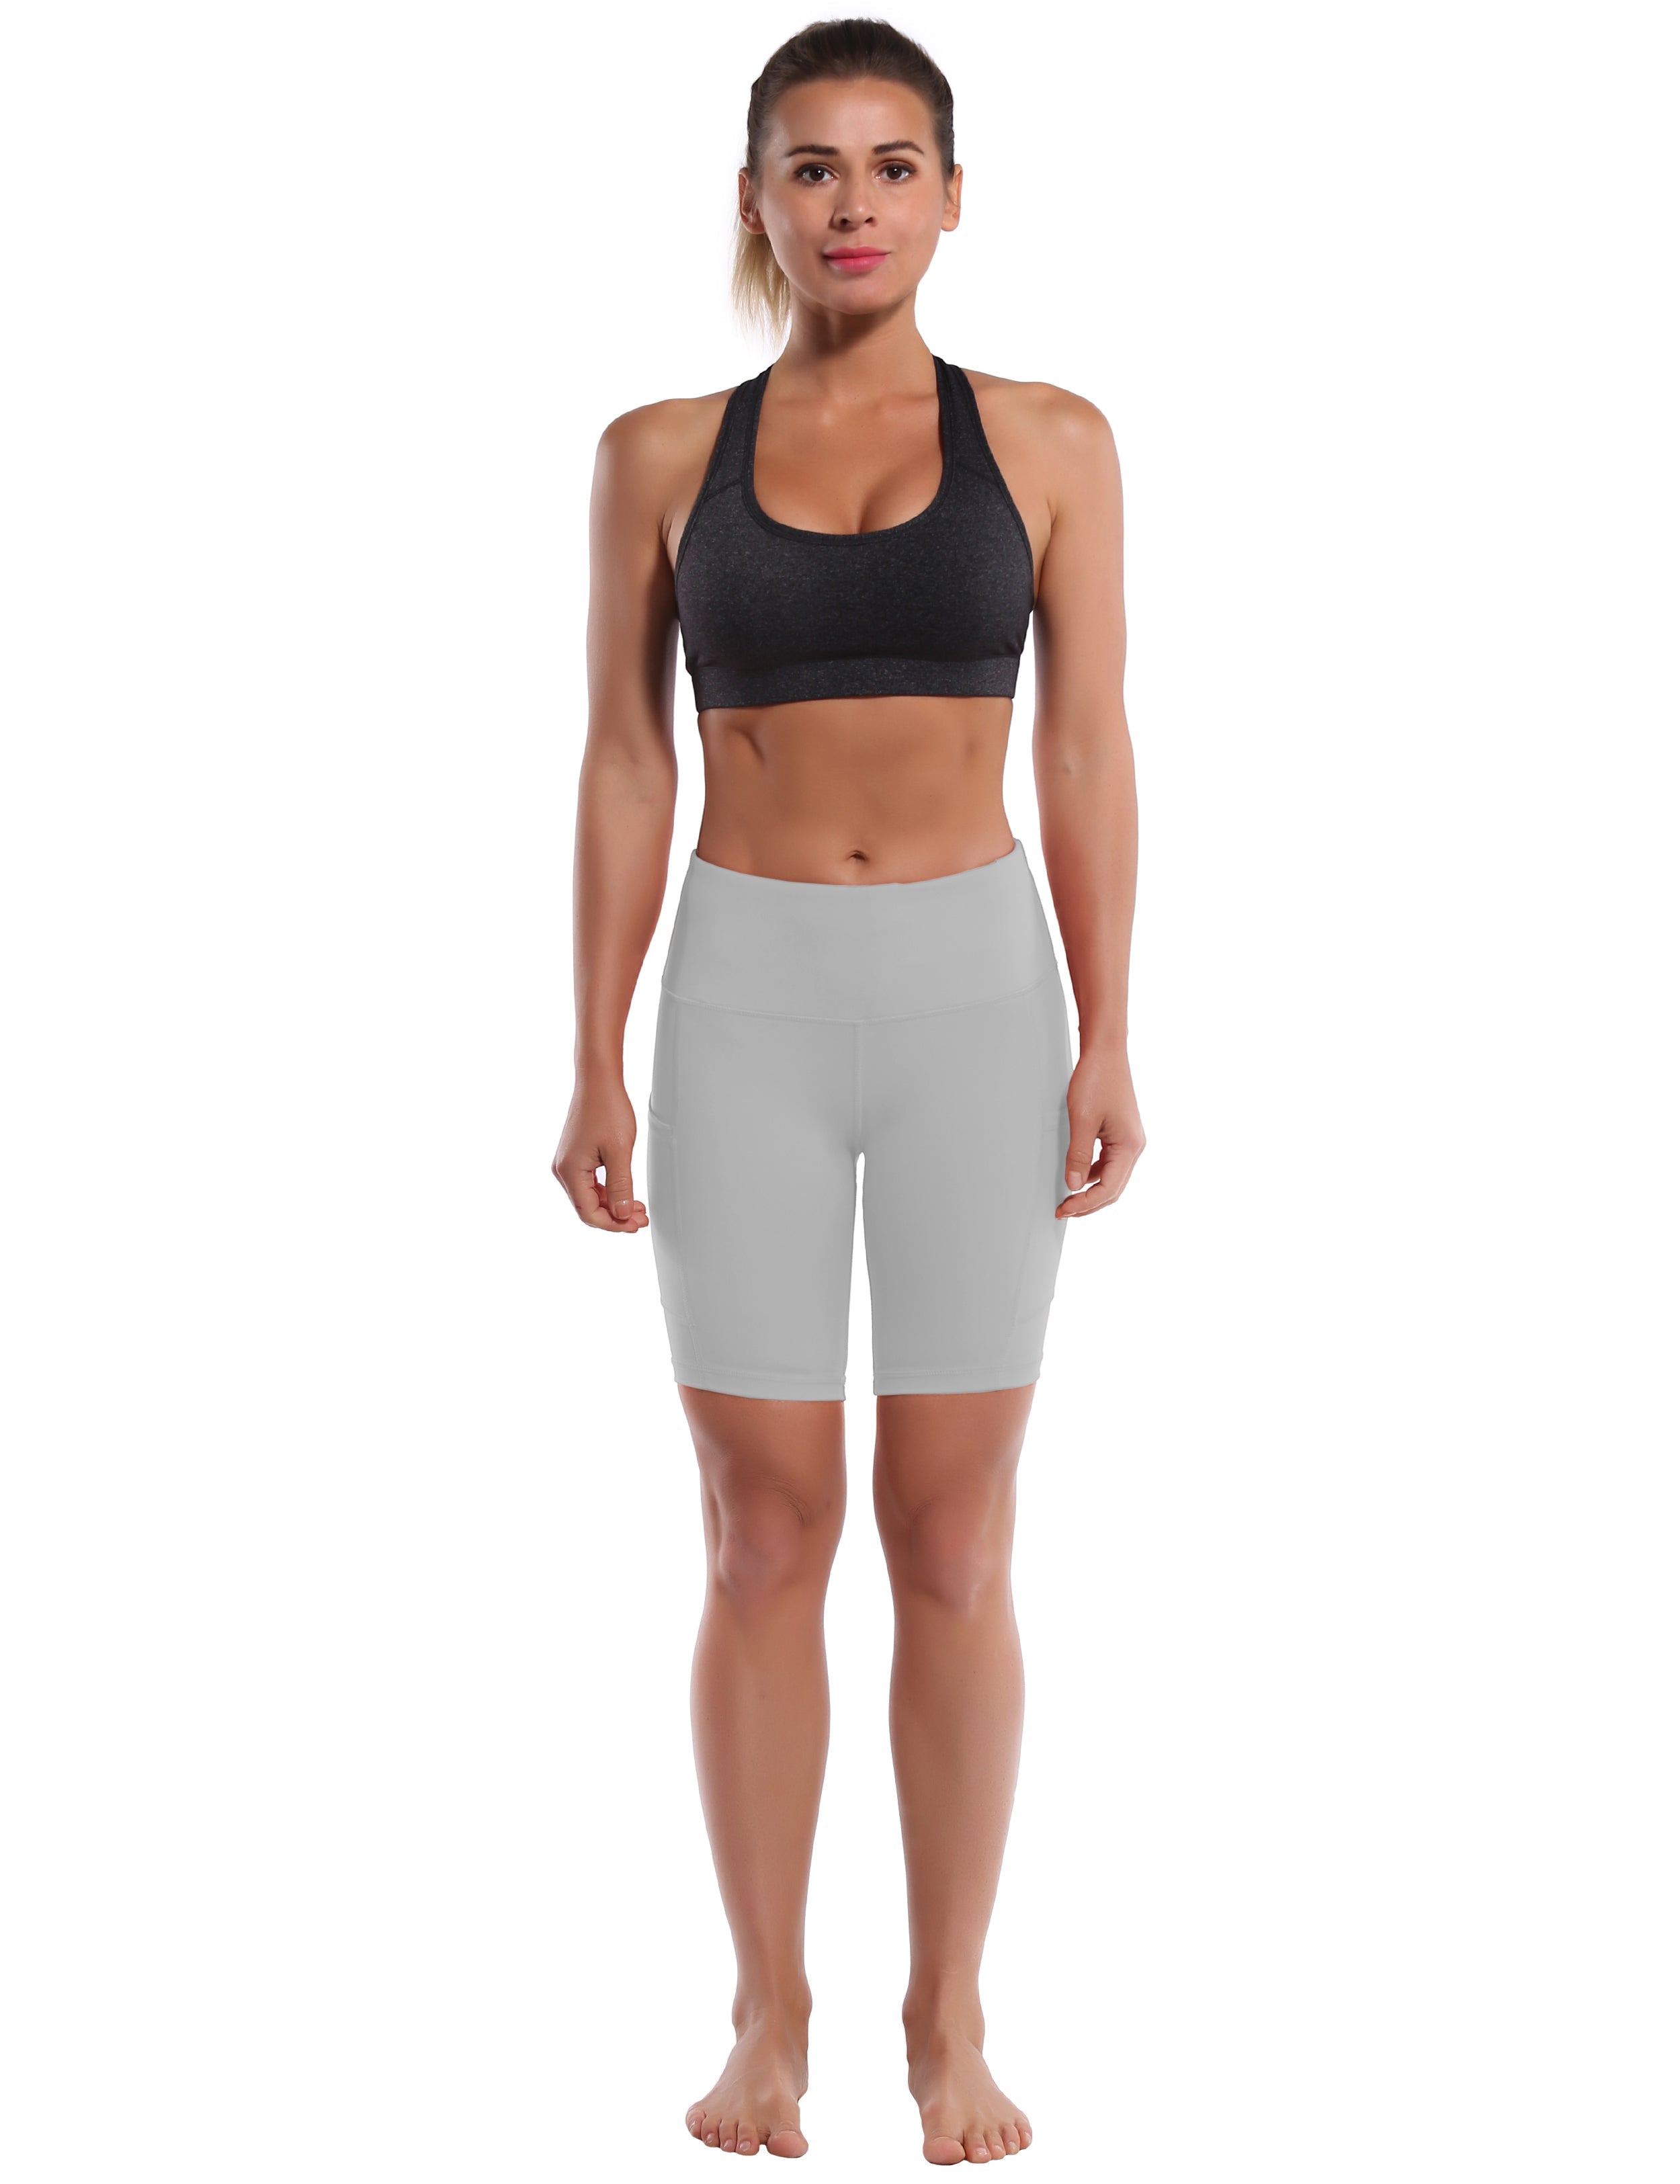 8" Side Pockets Golf Shorts lightgray Sleek, soft, smooth and totally comfortable: our newest style is here. Softest-ever fabric High elasticity High density 4-way stretch Fabric doesn't attract lint easily No see-through Moisture-wicking Machine wash 75% Nylon, 25% Spandex